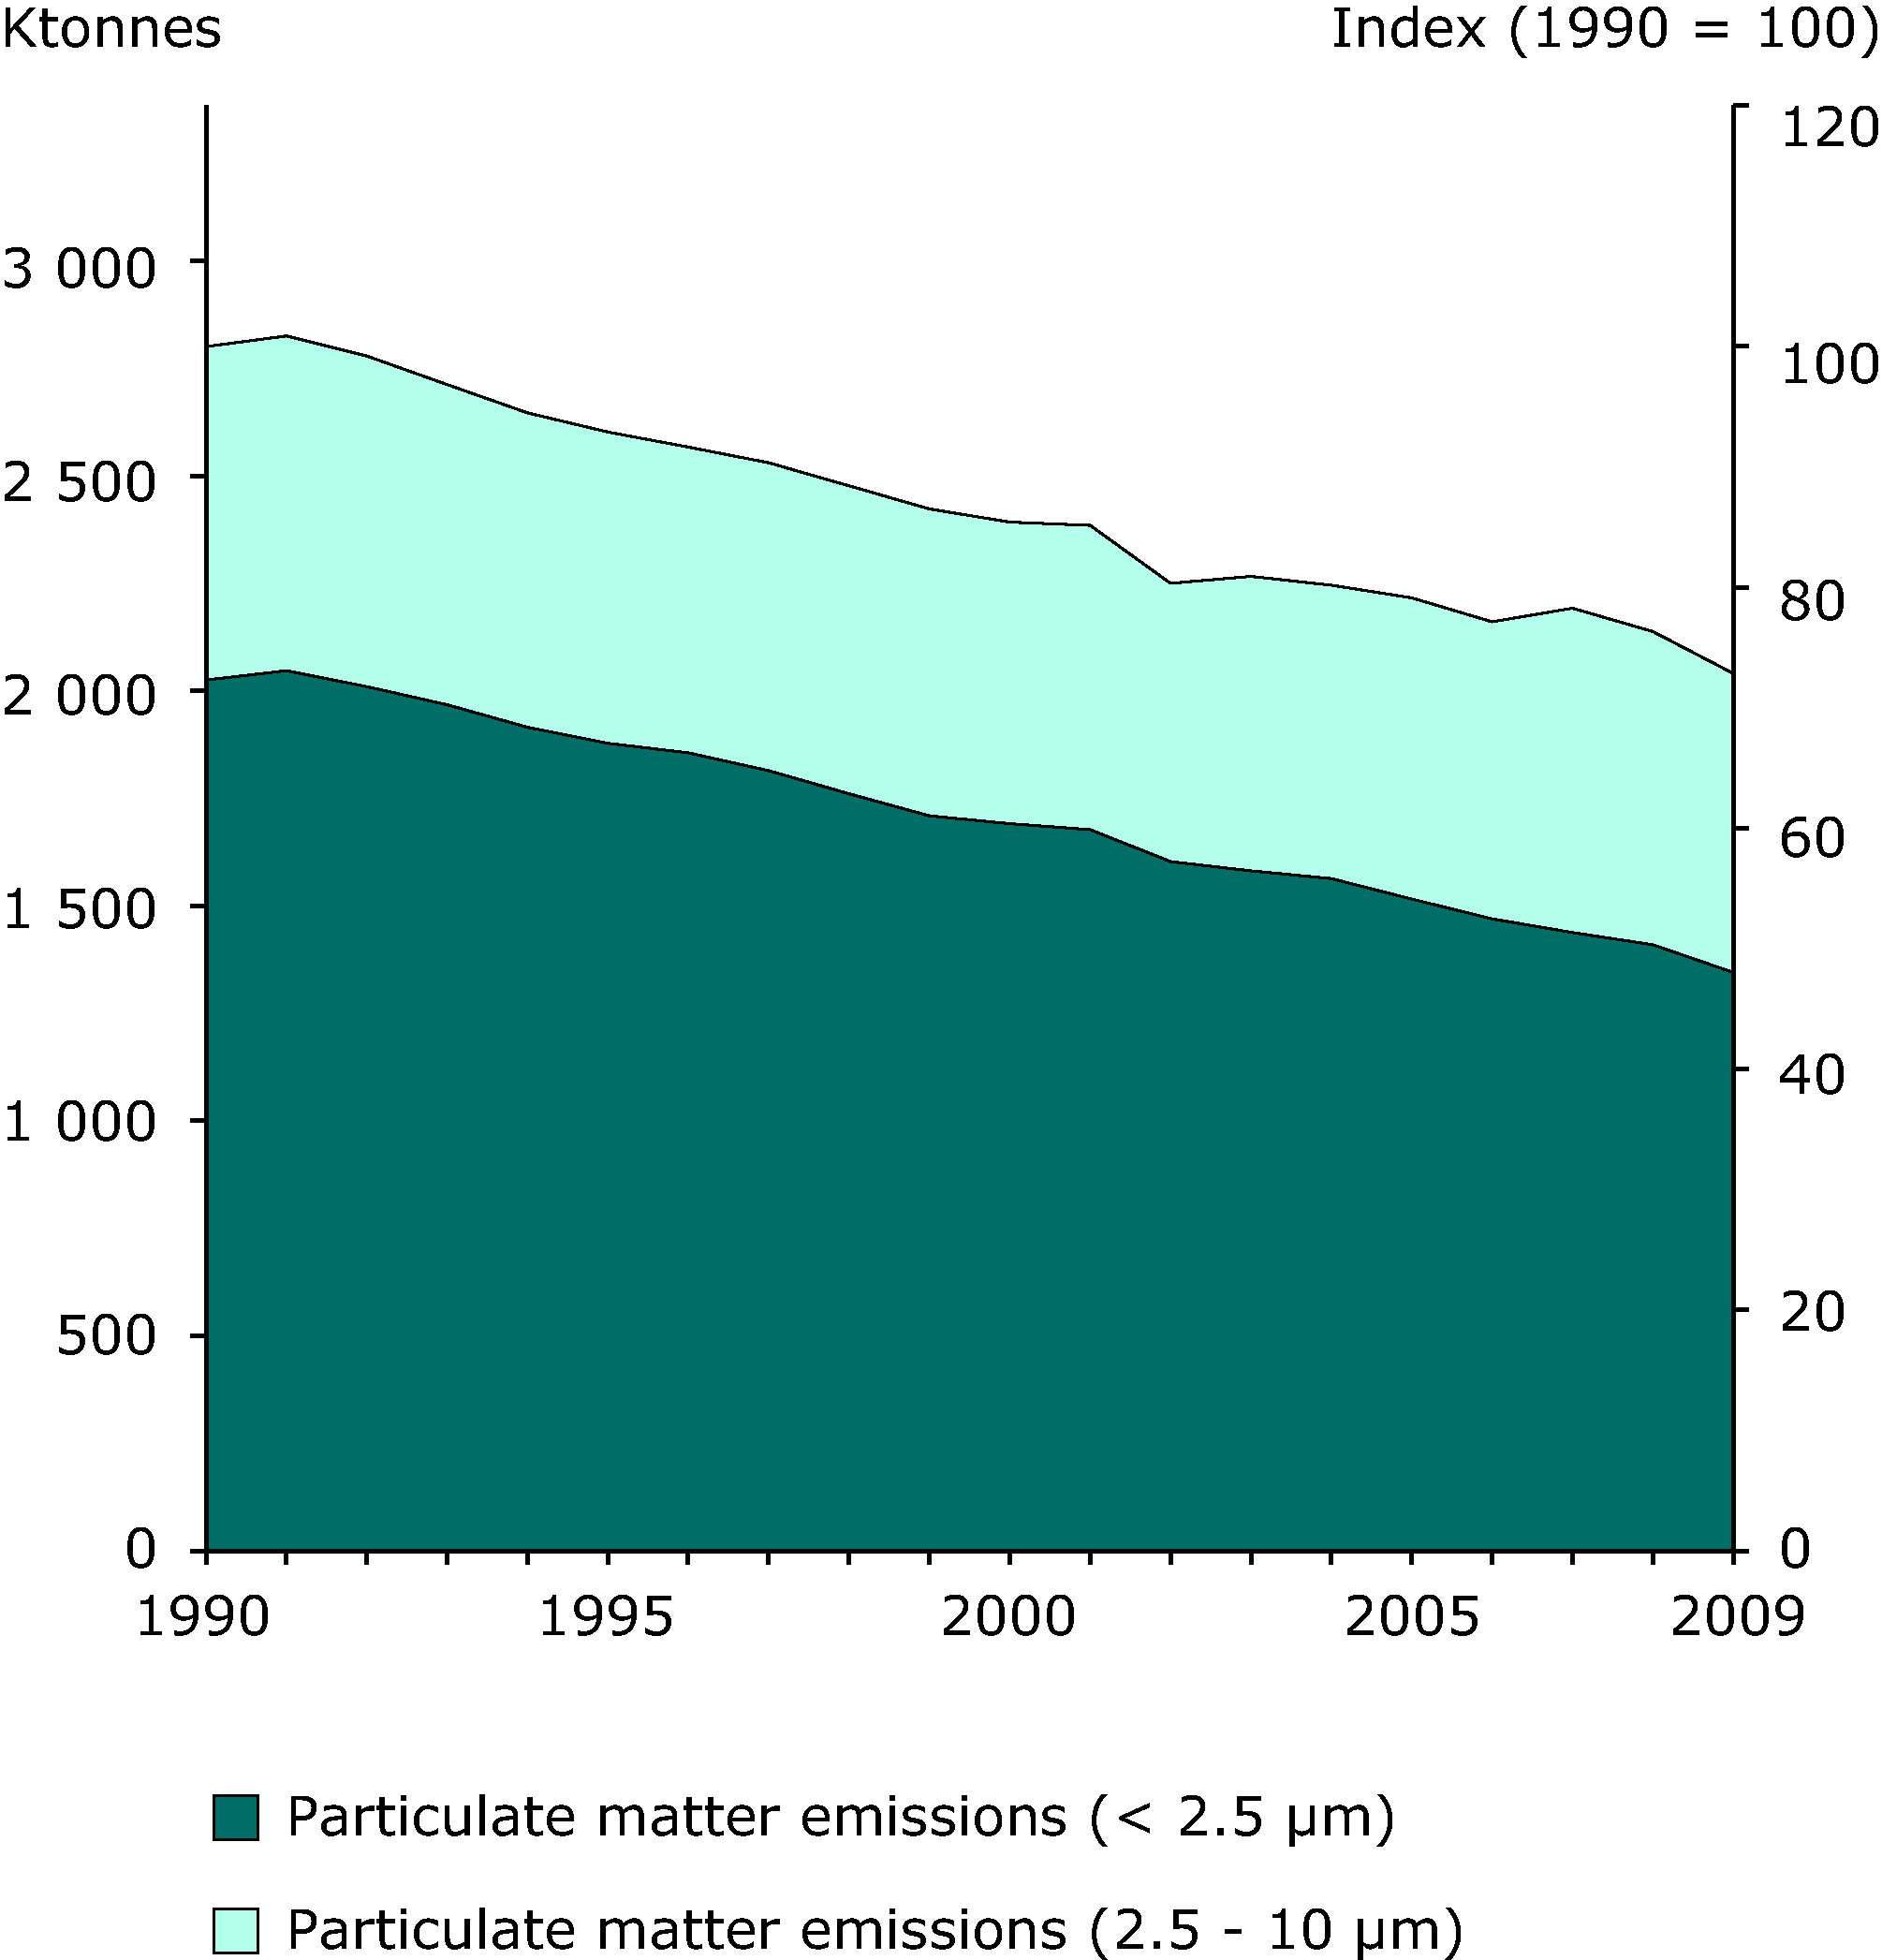 Emissions of primary PM2.5 and PM10 particulate matter (EEA member countries)